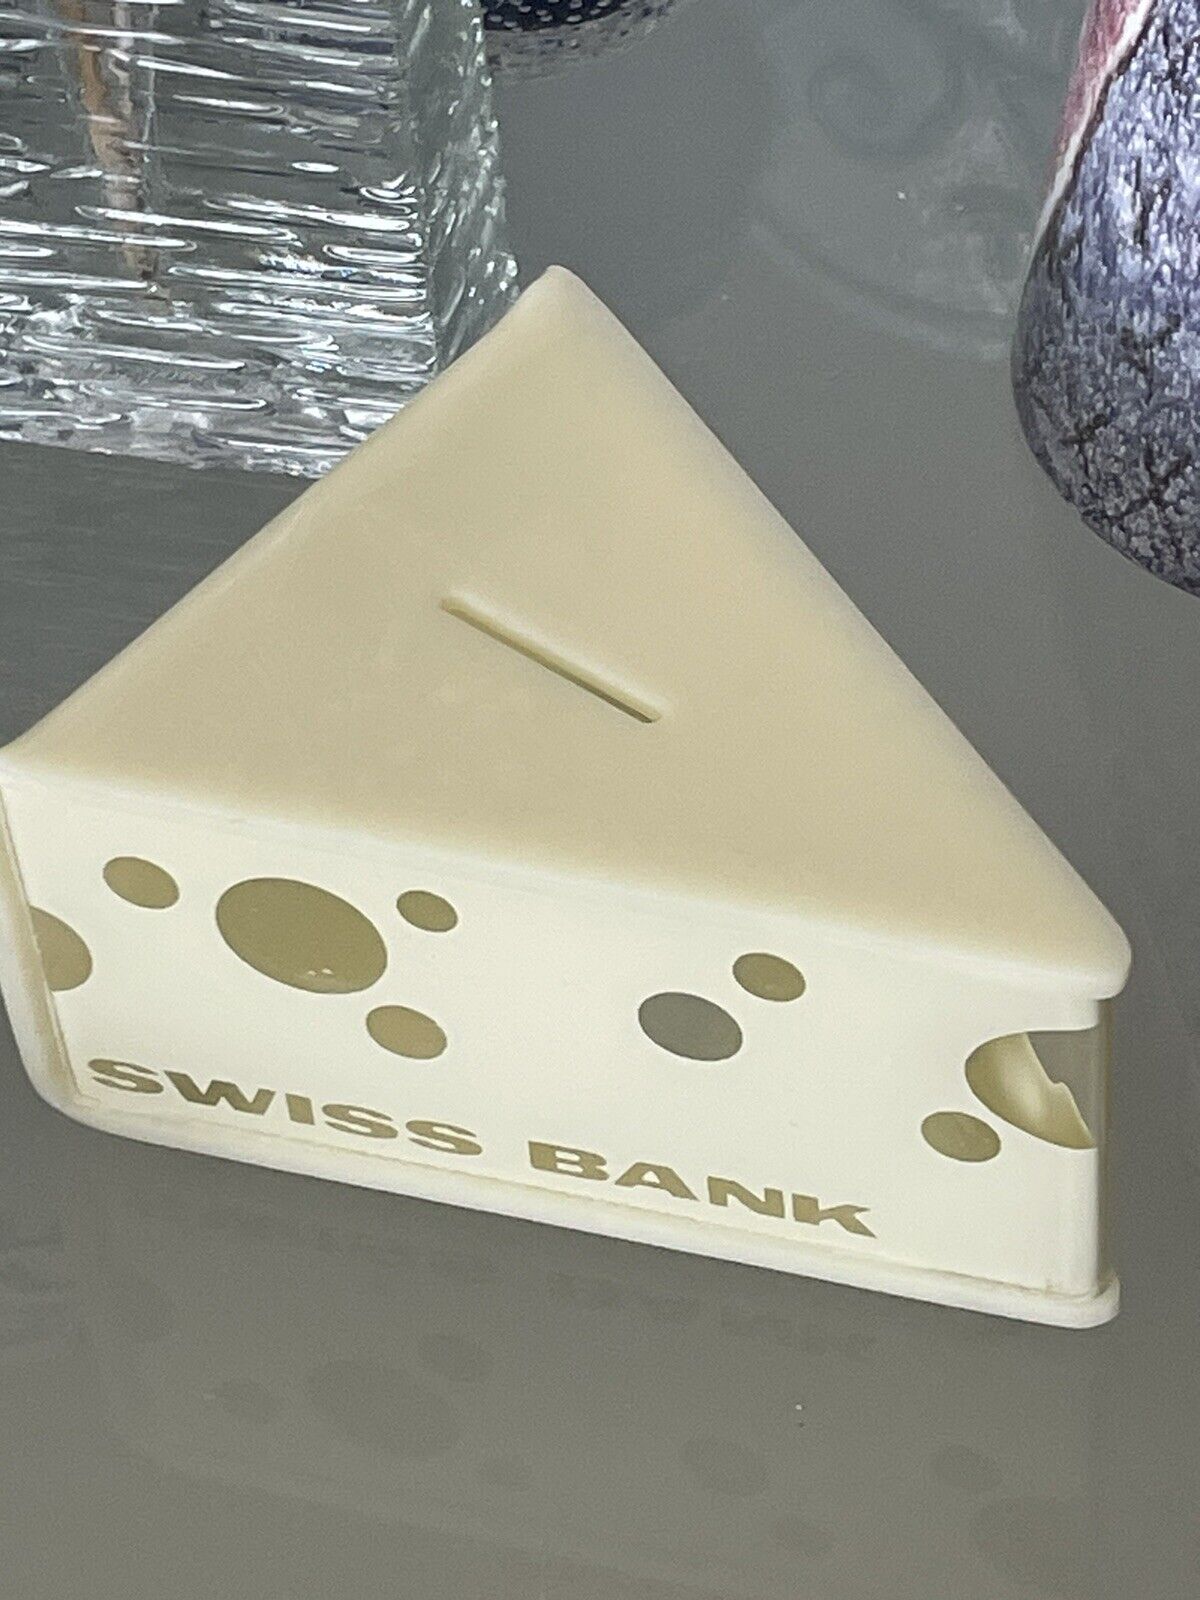 Vintage 1970s Swiss Cheese Plastic Bank Rare Find In Excellent Condition